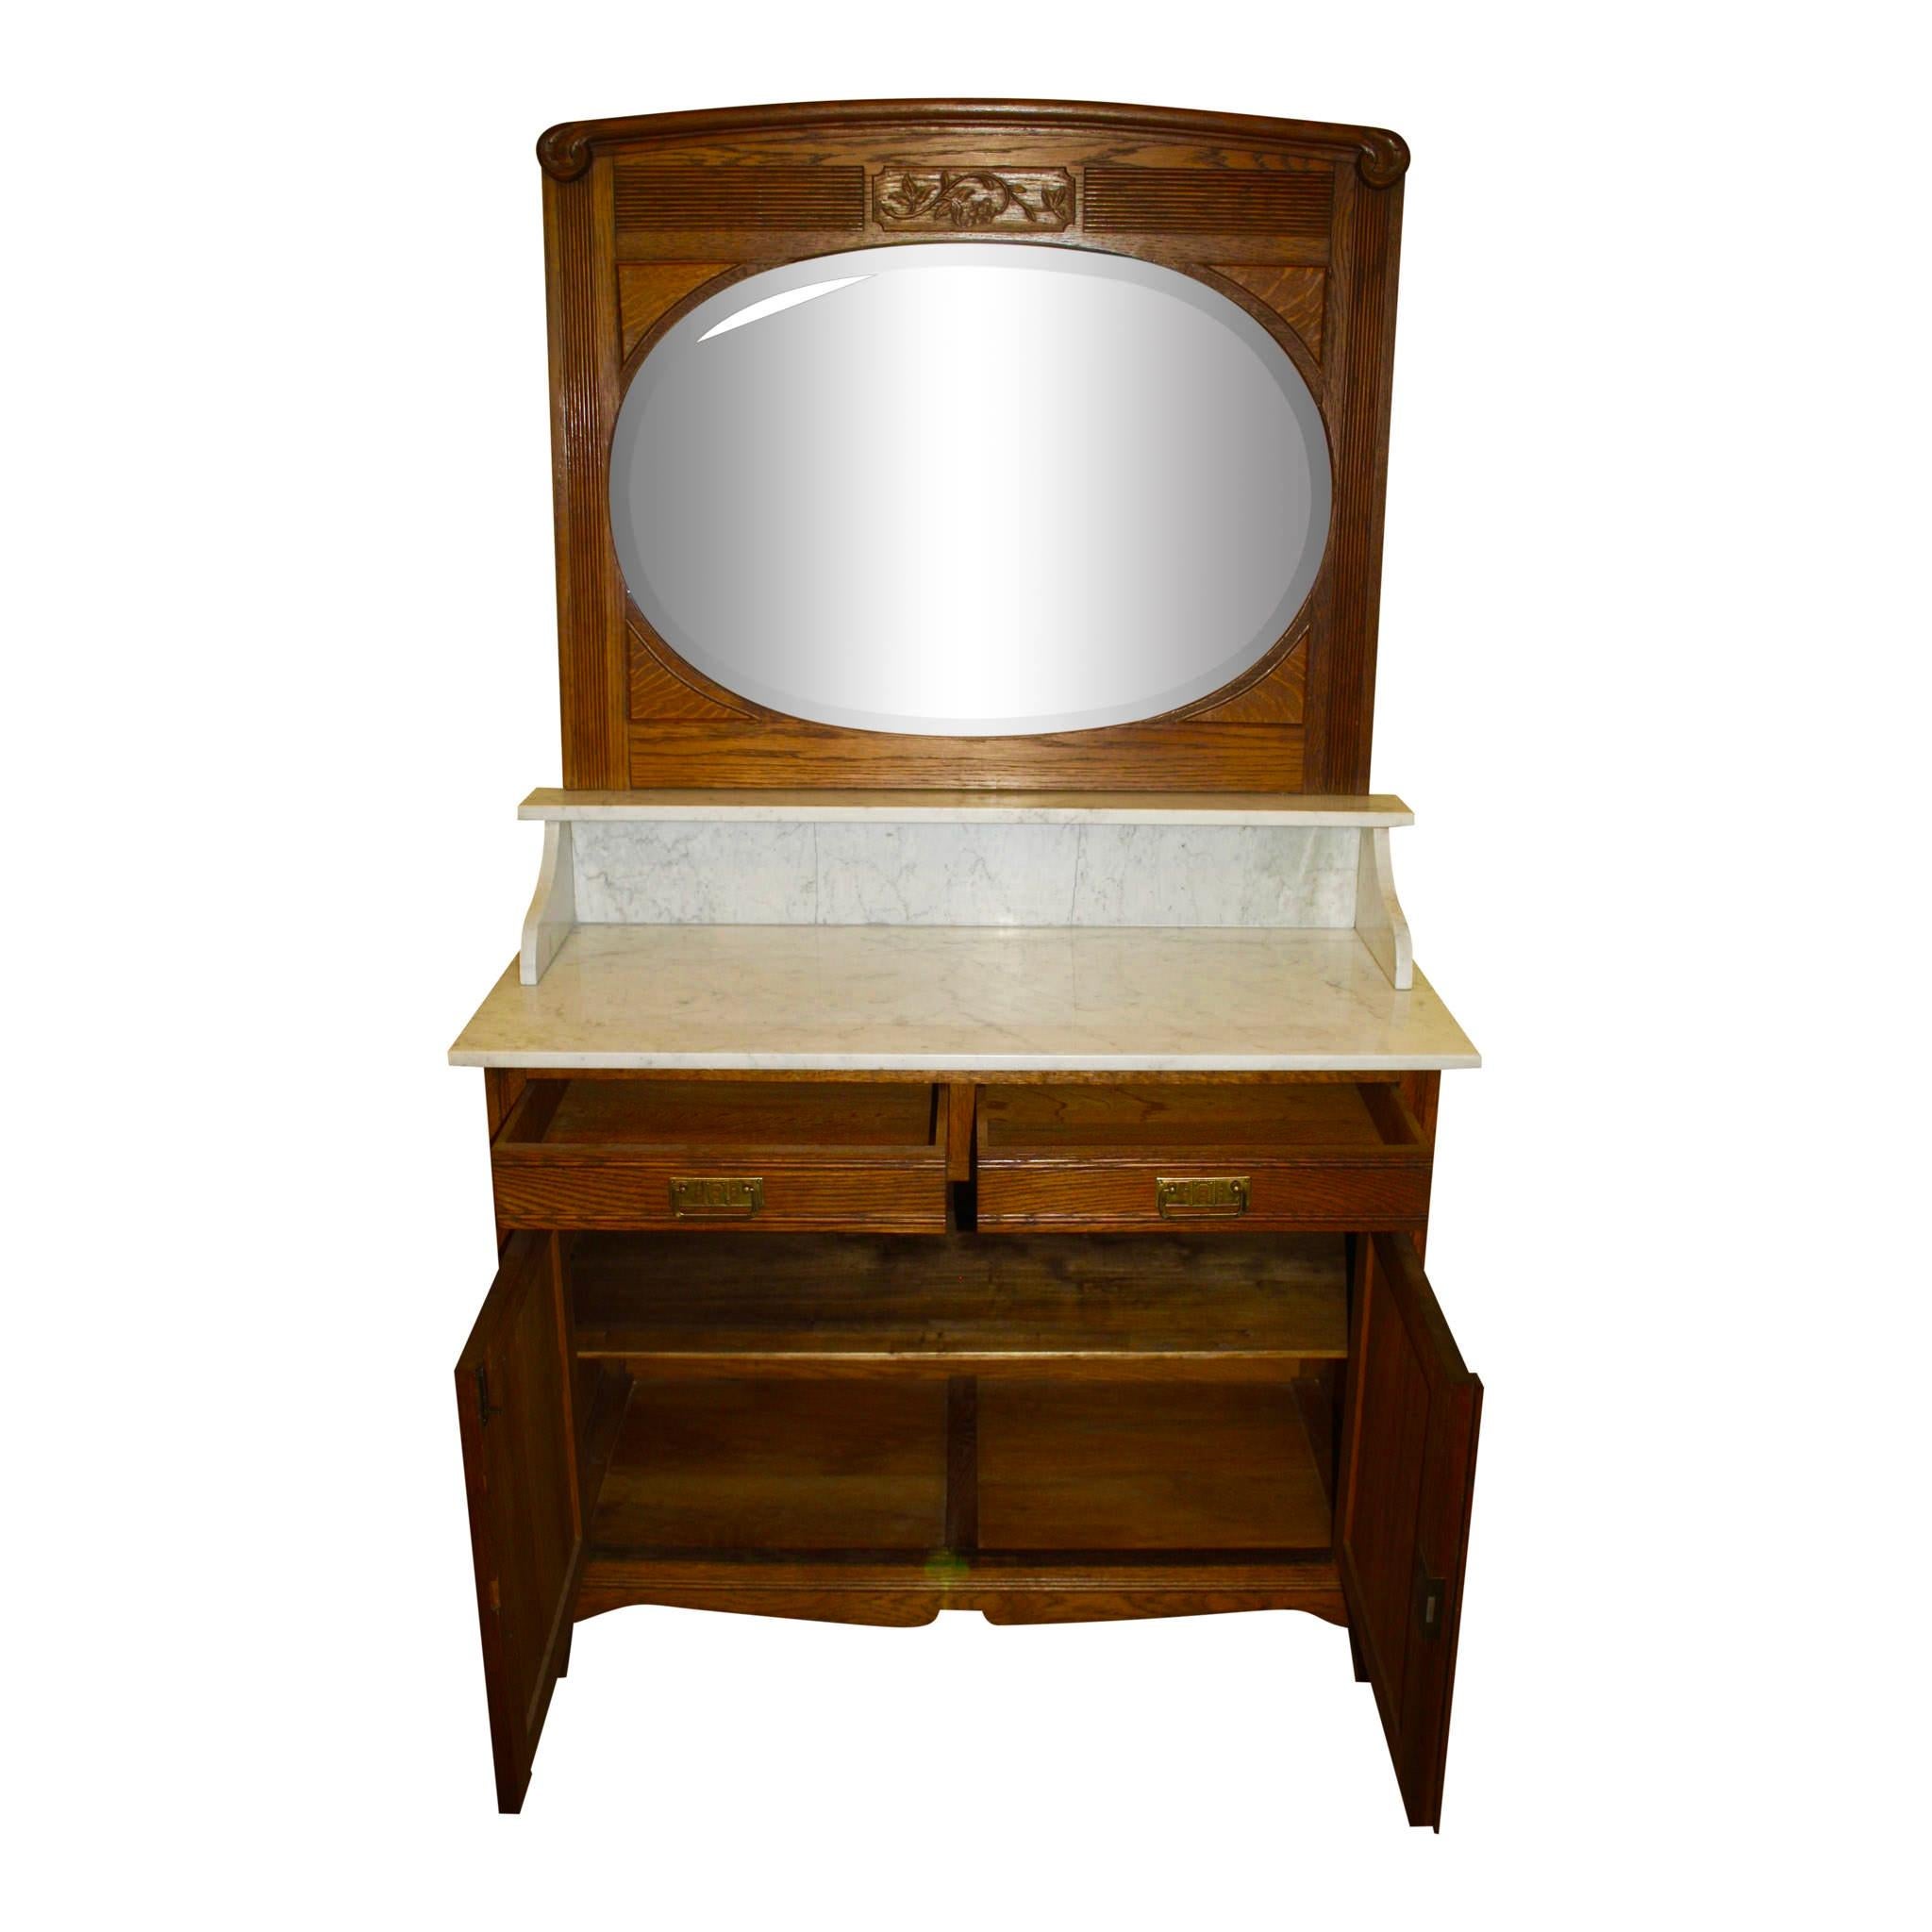 A beveled, oval mirror framed in oak with fluting and a floral carving sits above the gray veined marble countertop of this Belgian vanity dresser. Convenient storage is provided in the two drawers and floral carved double doors, which open to a